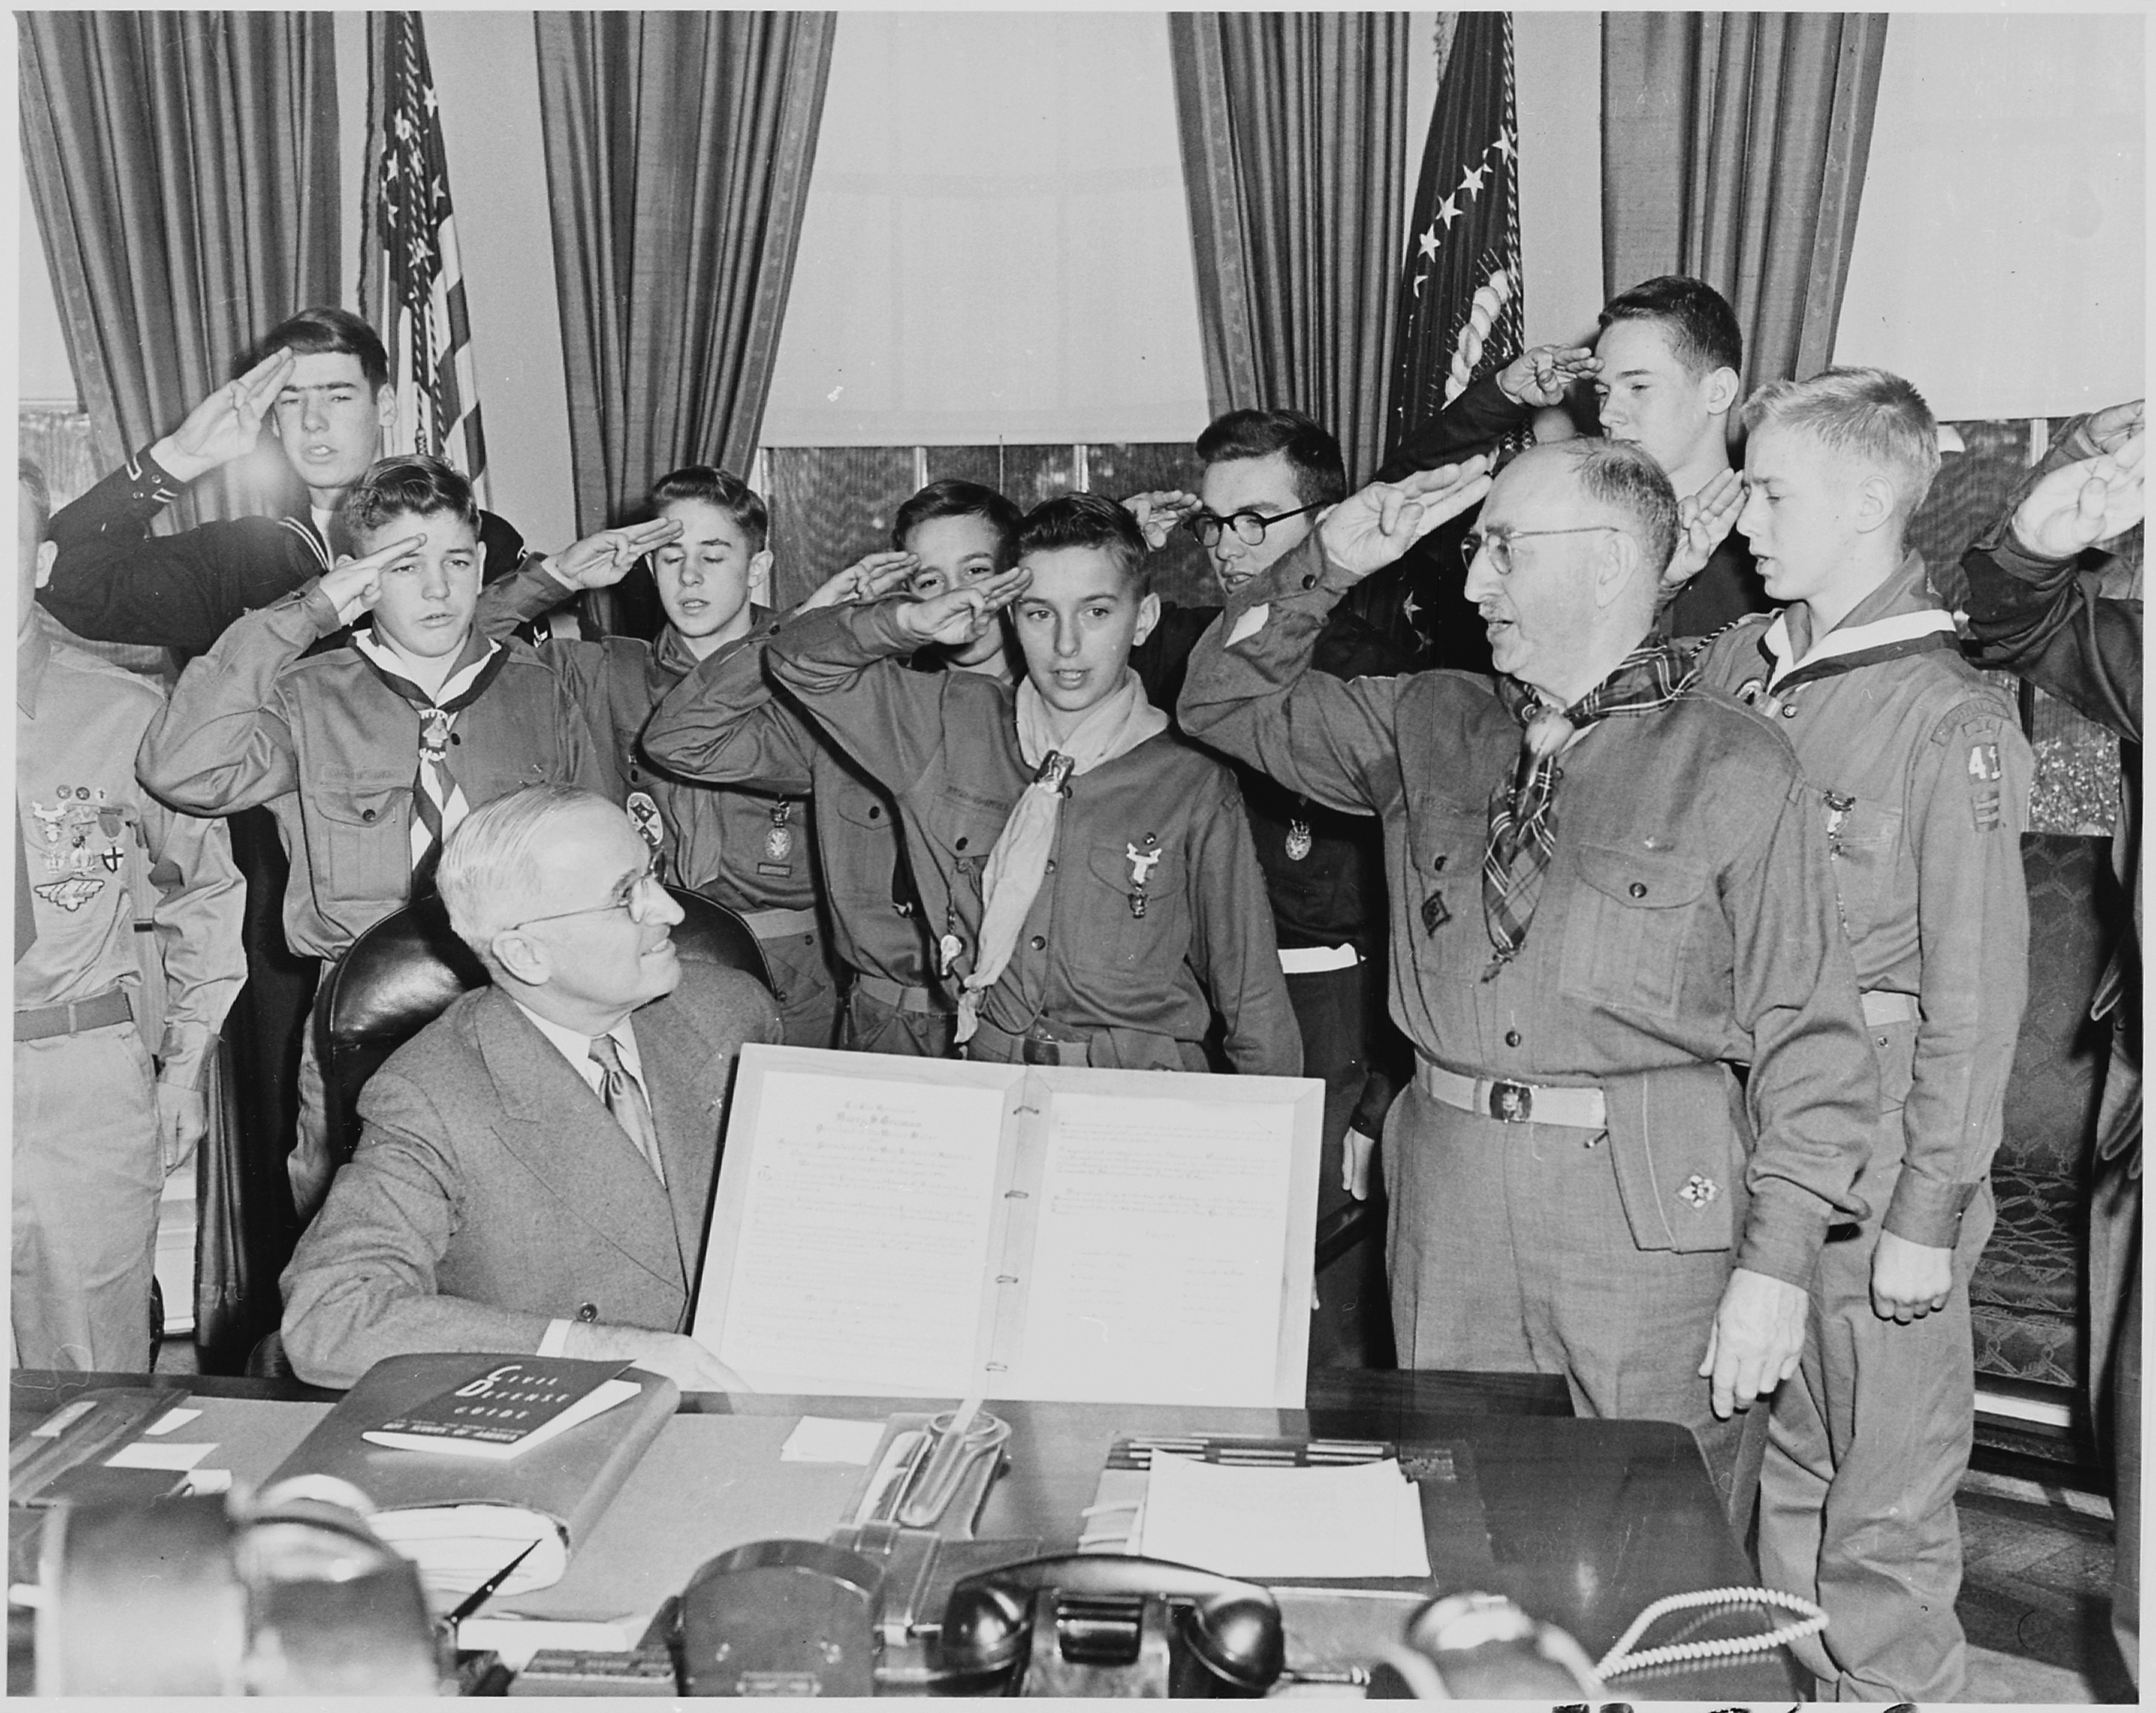 File Photograph Of President Truman In The Oval Office Receiving A Report On The Accomplishments Of The Boy Scouts From A Nara 0293 Jpg Wikimedia Commons